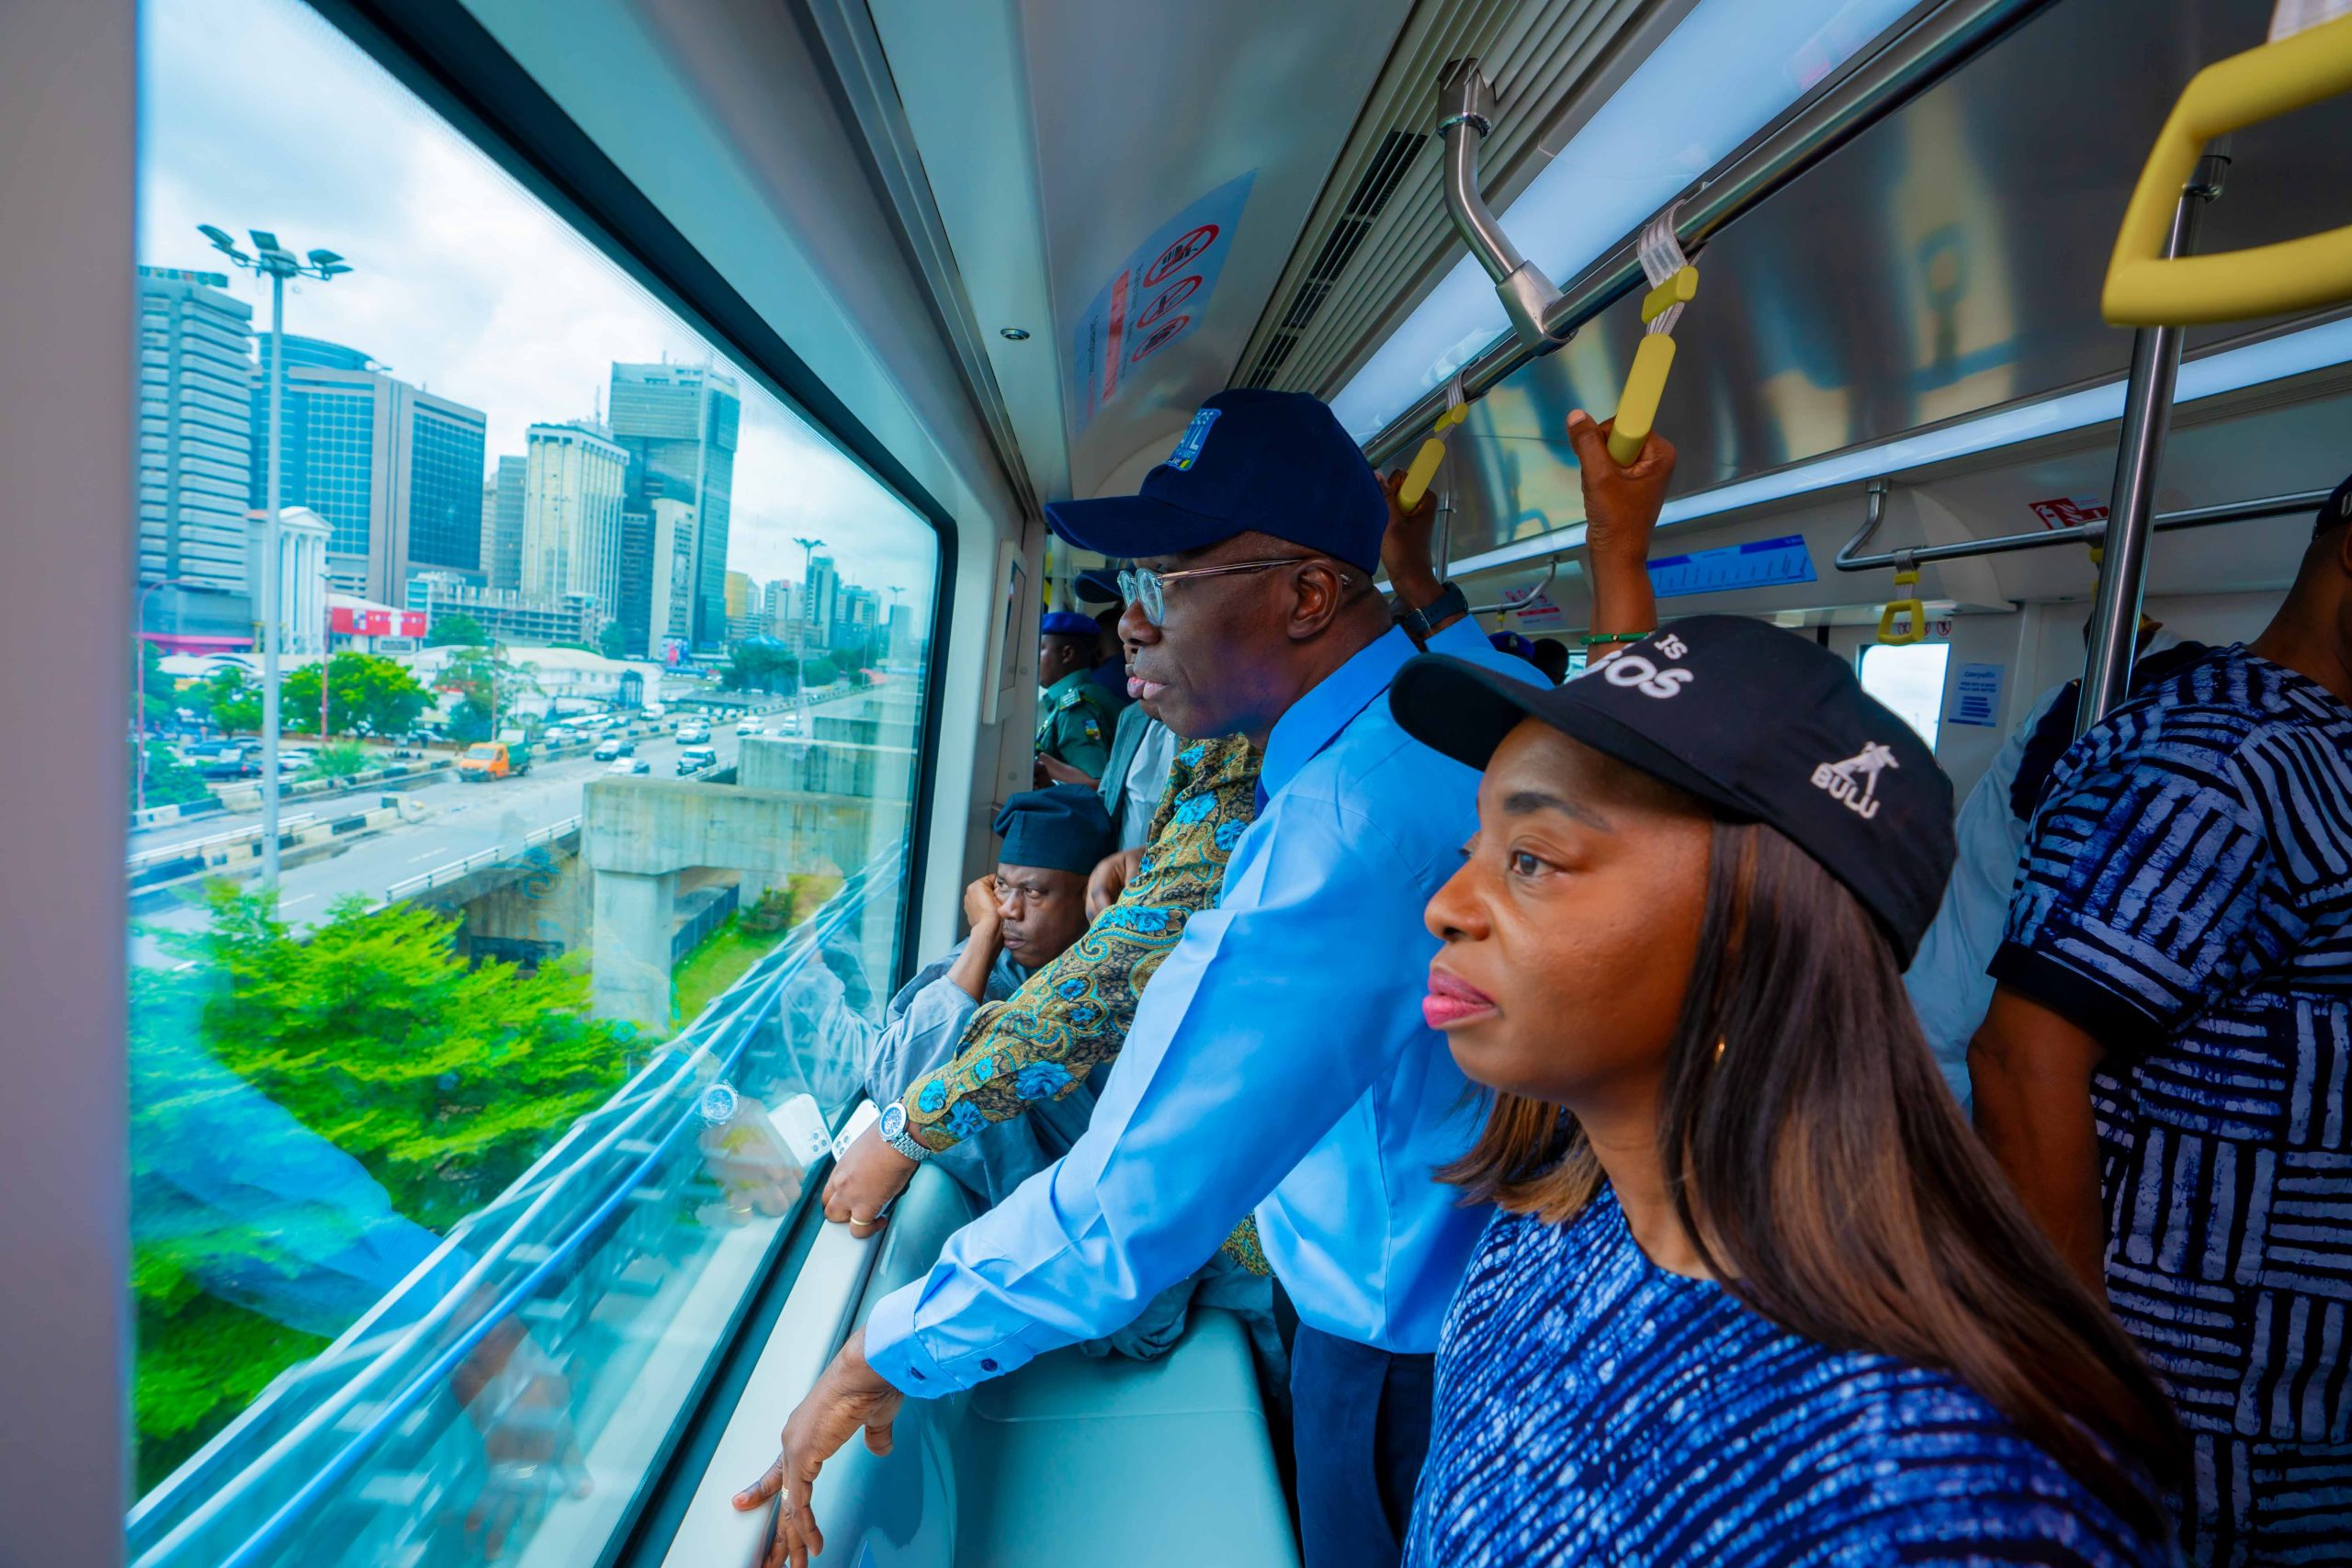 Sanwo-Olu Flags Off Commercial Operations Of Lagos Blue Rail With 800 Passengers